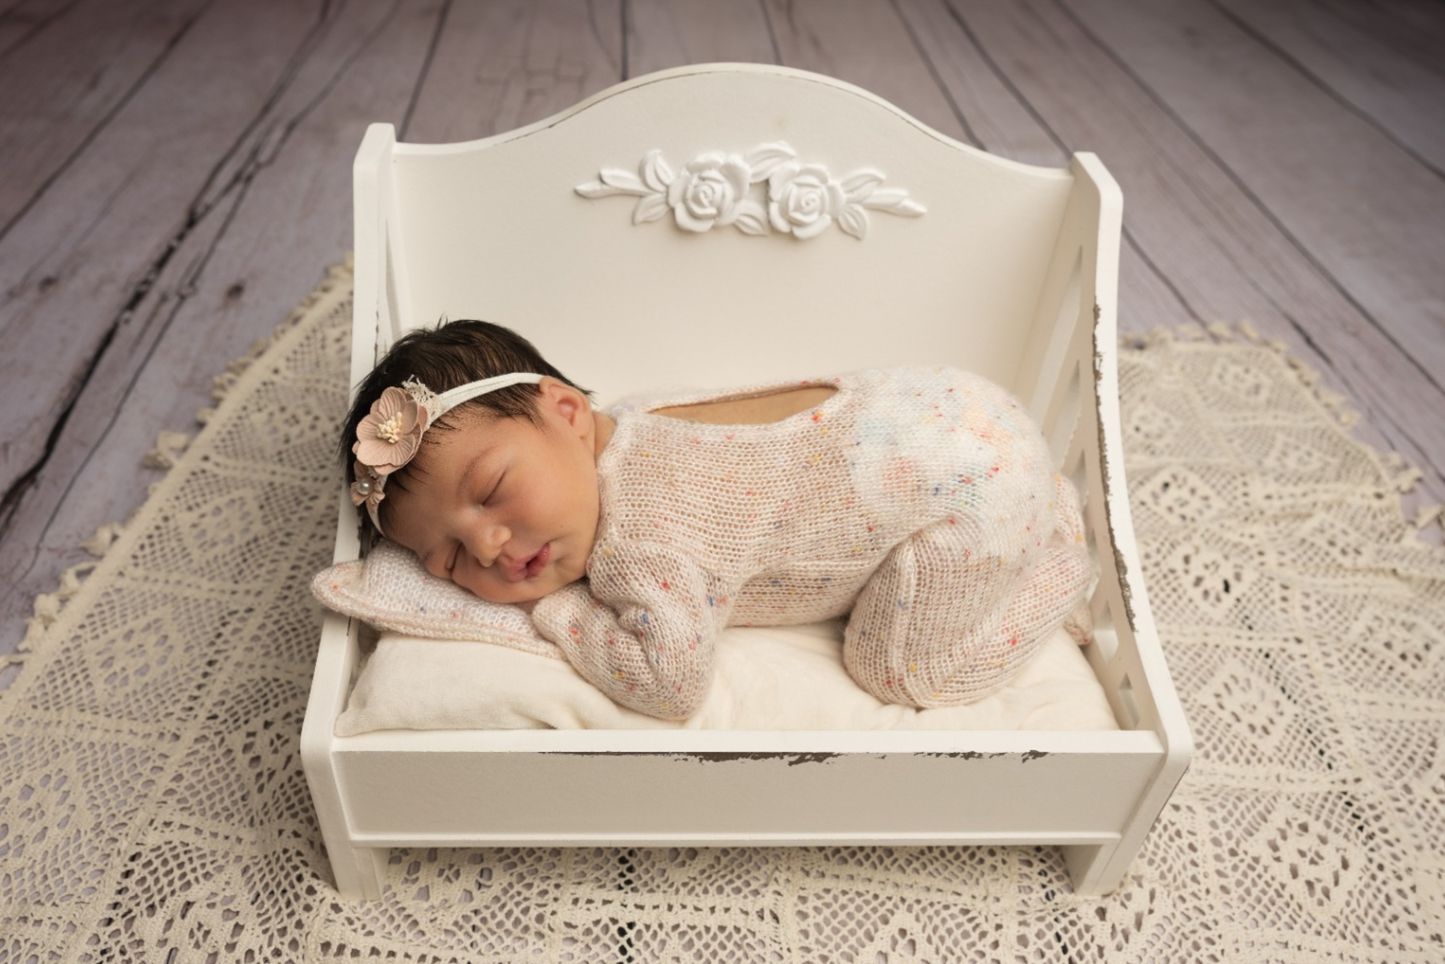 Newborn asleep on a white vintage daybed, cozy in a knit wrap, newborn photography prop.